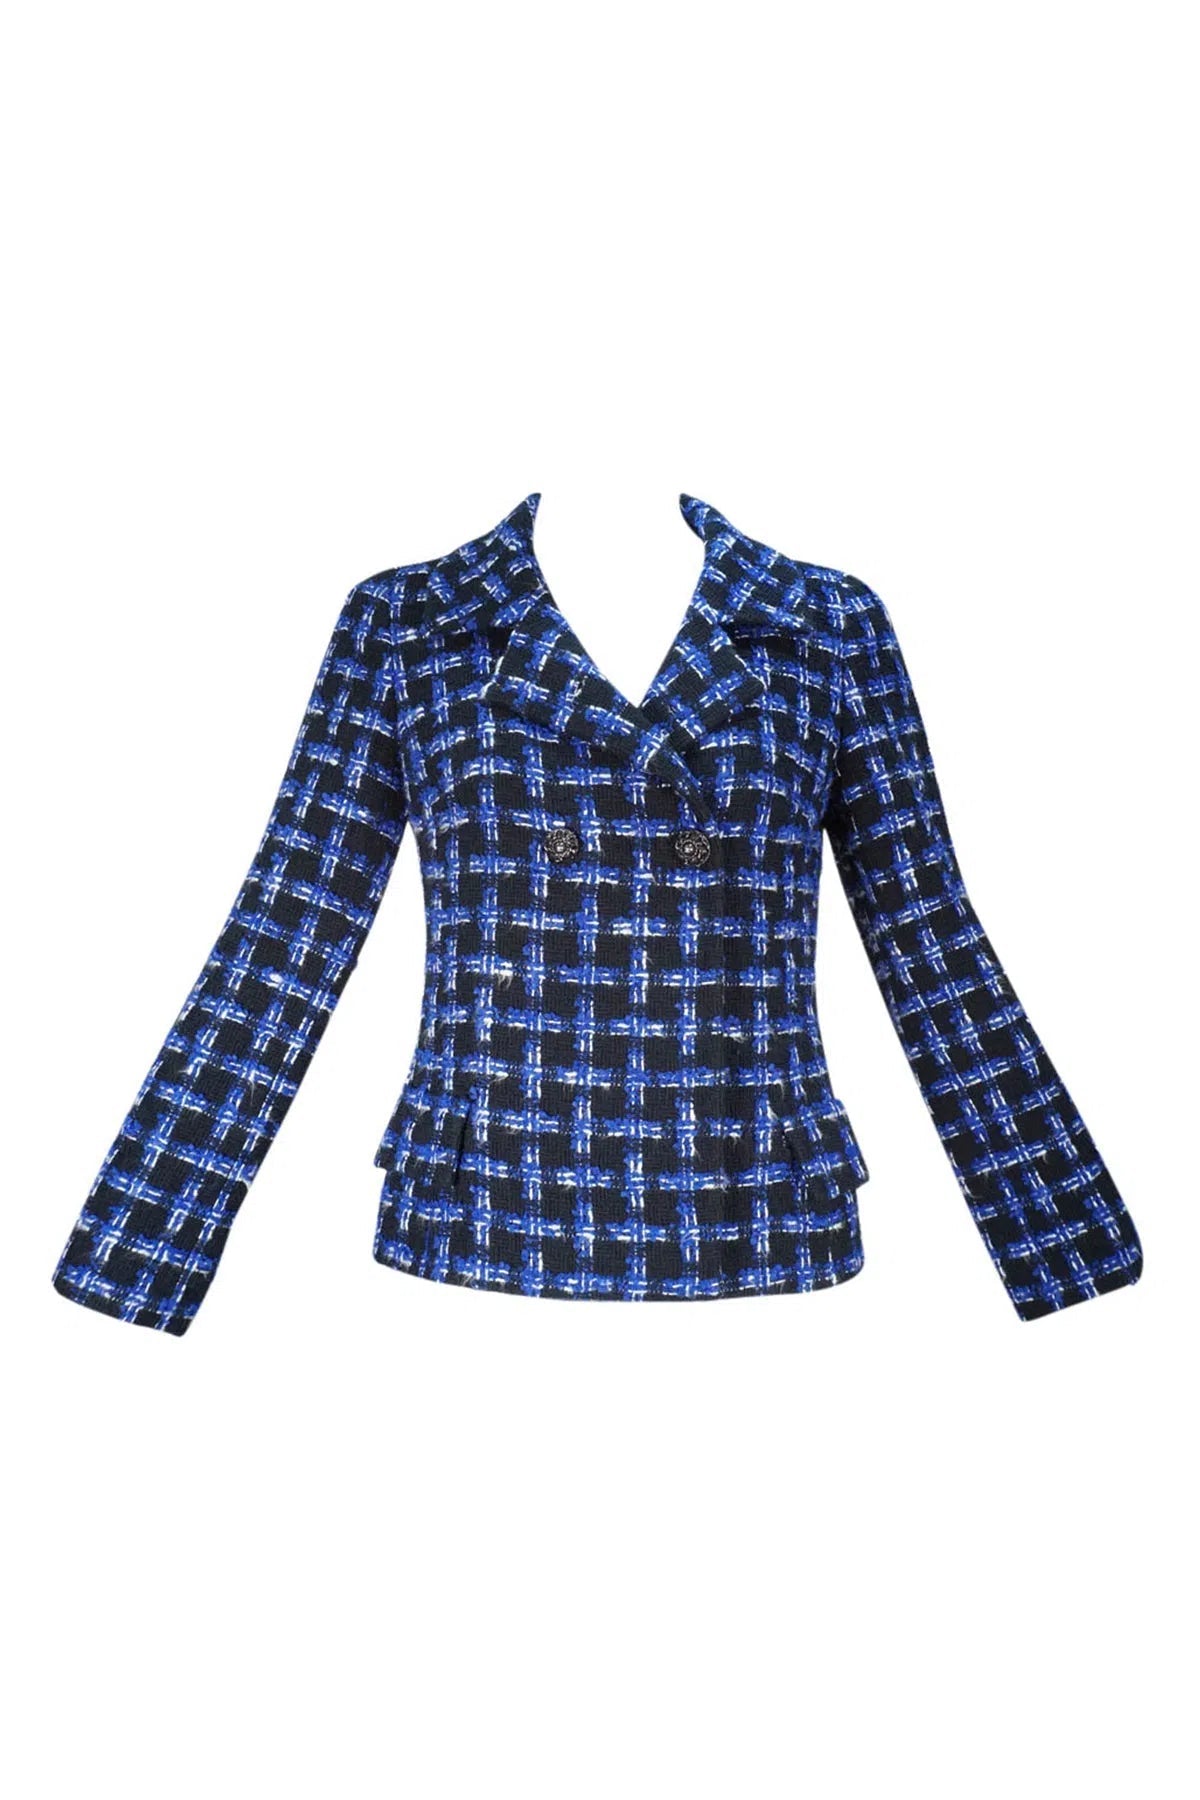 Chanel Blue and Black Tweed Two Button Jacket Size 38